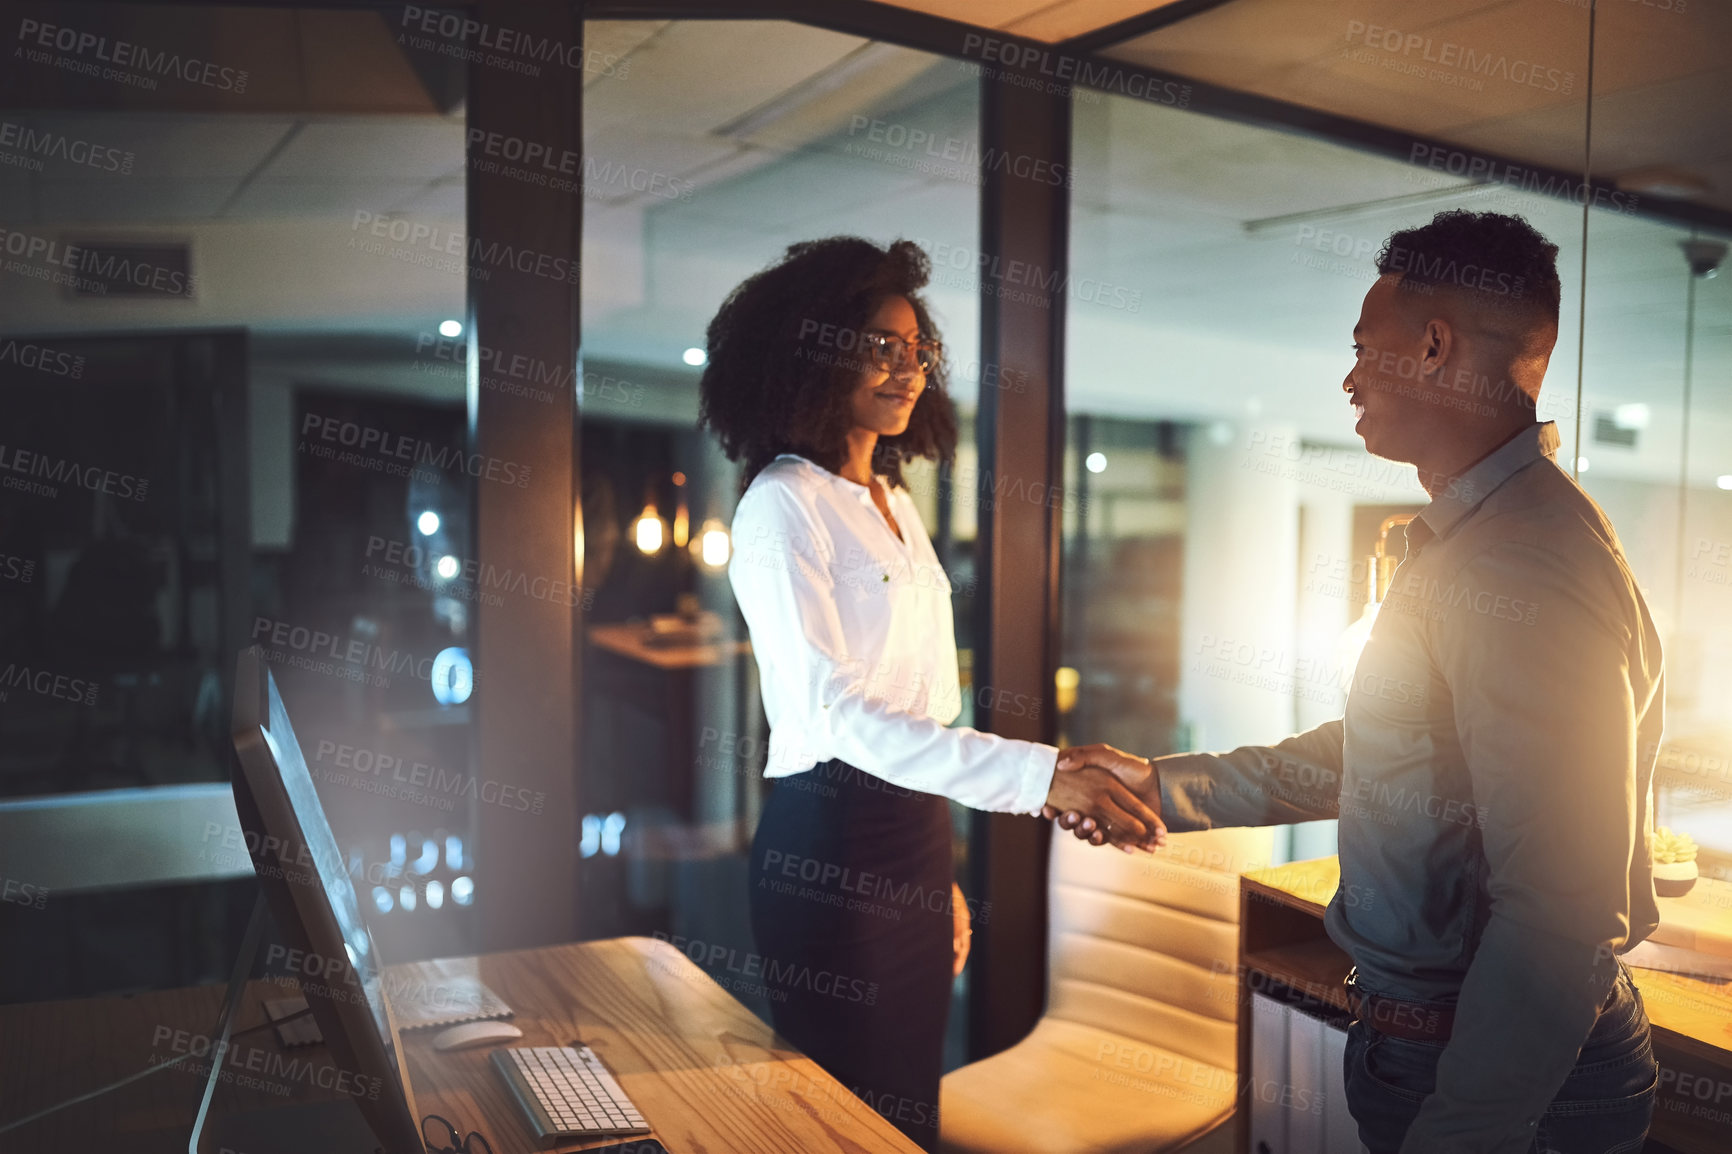 Buy stock photo Shot of two businesspeople shaking hands in an office at night